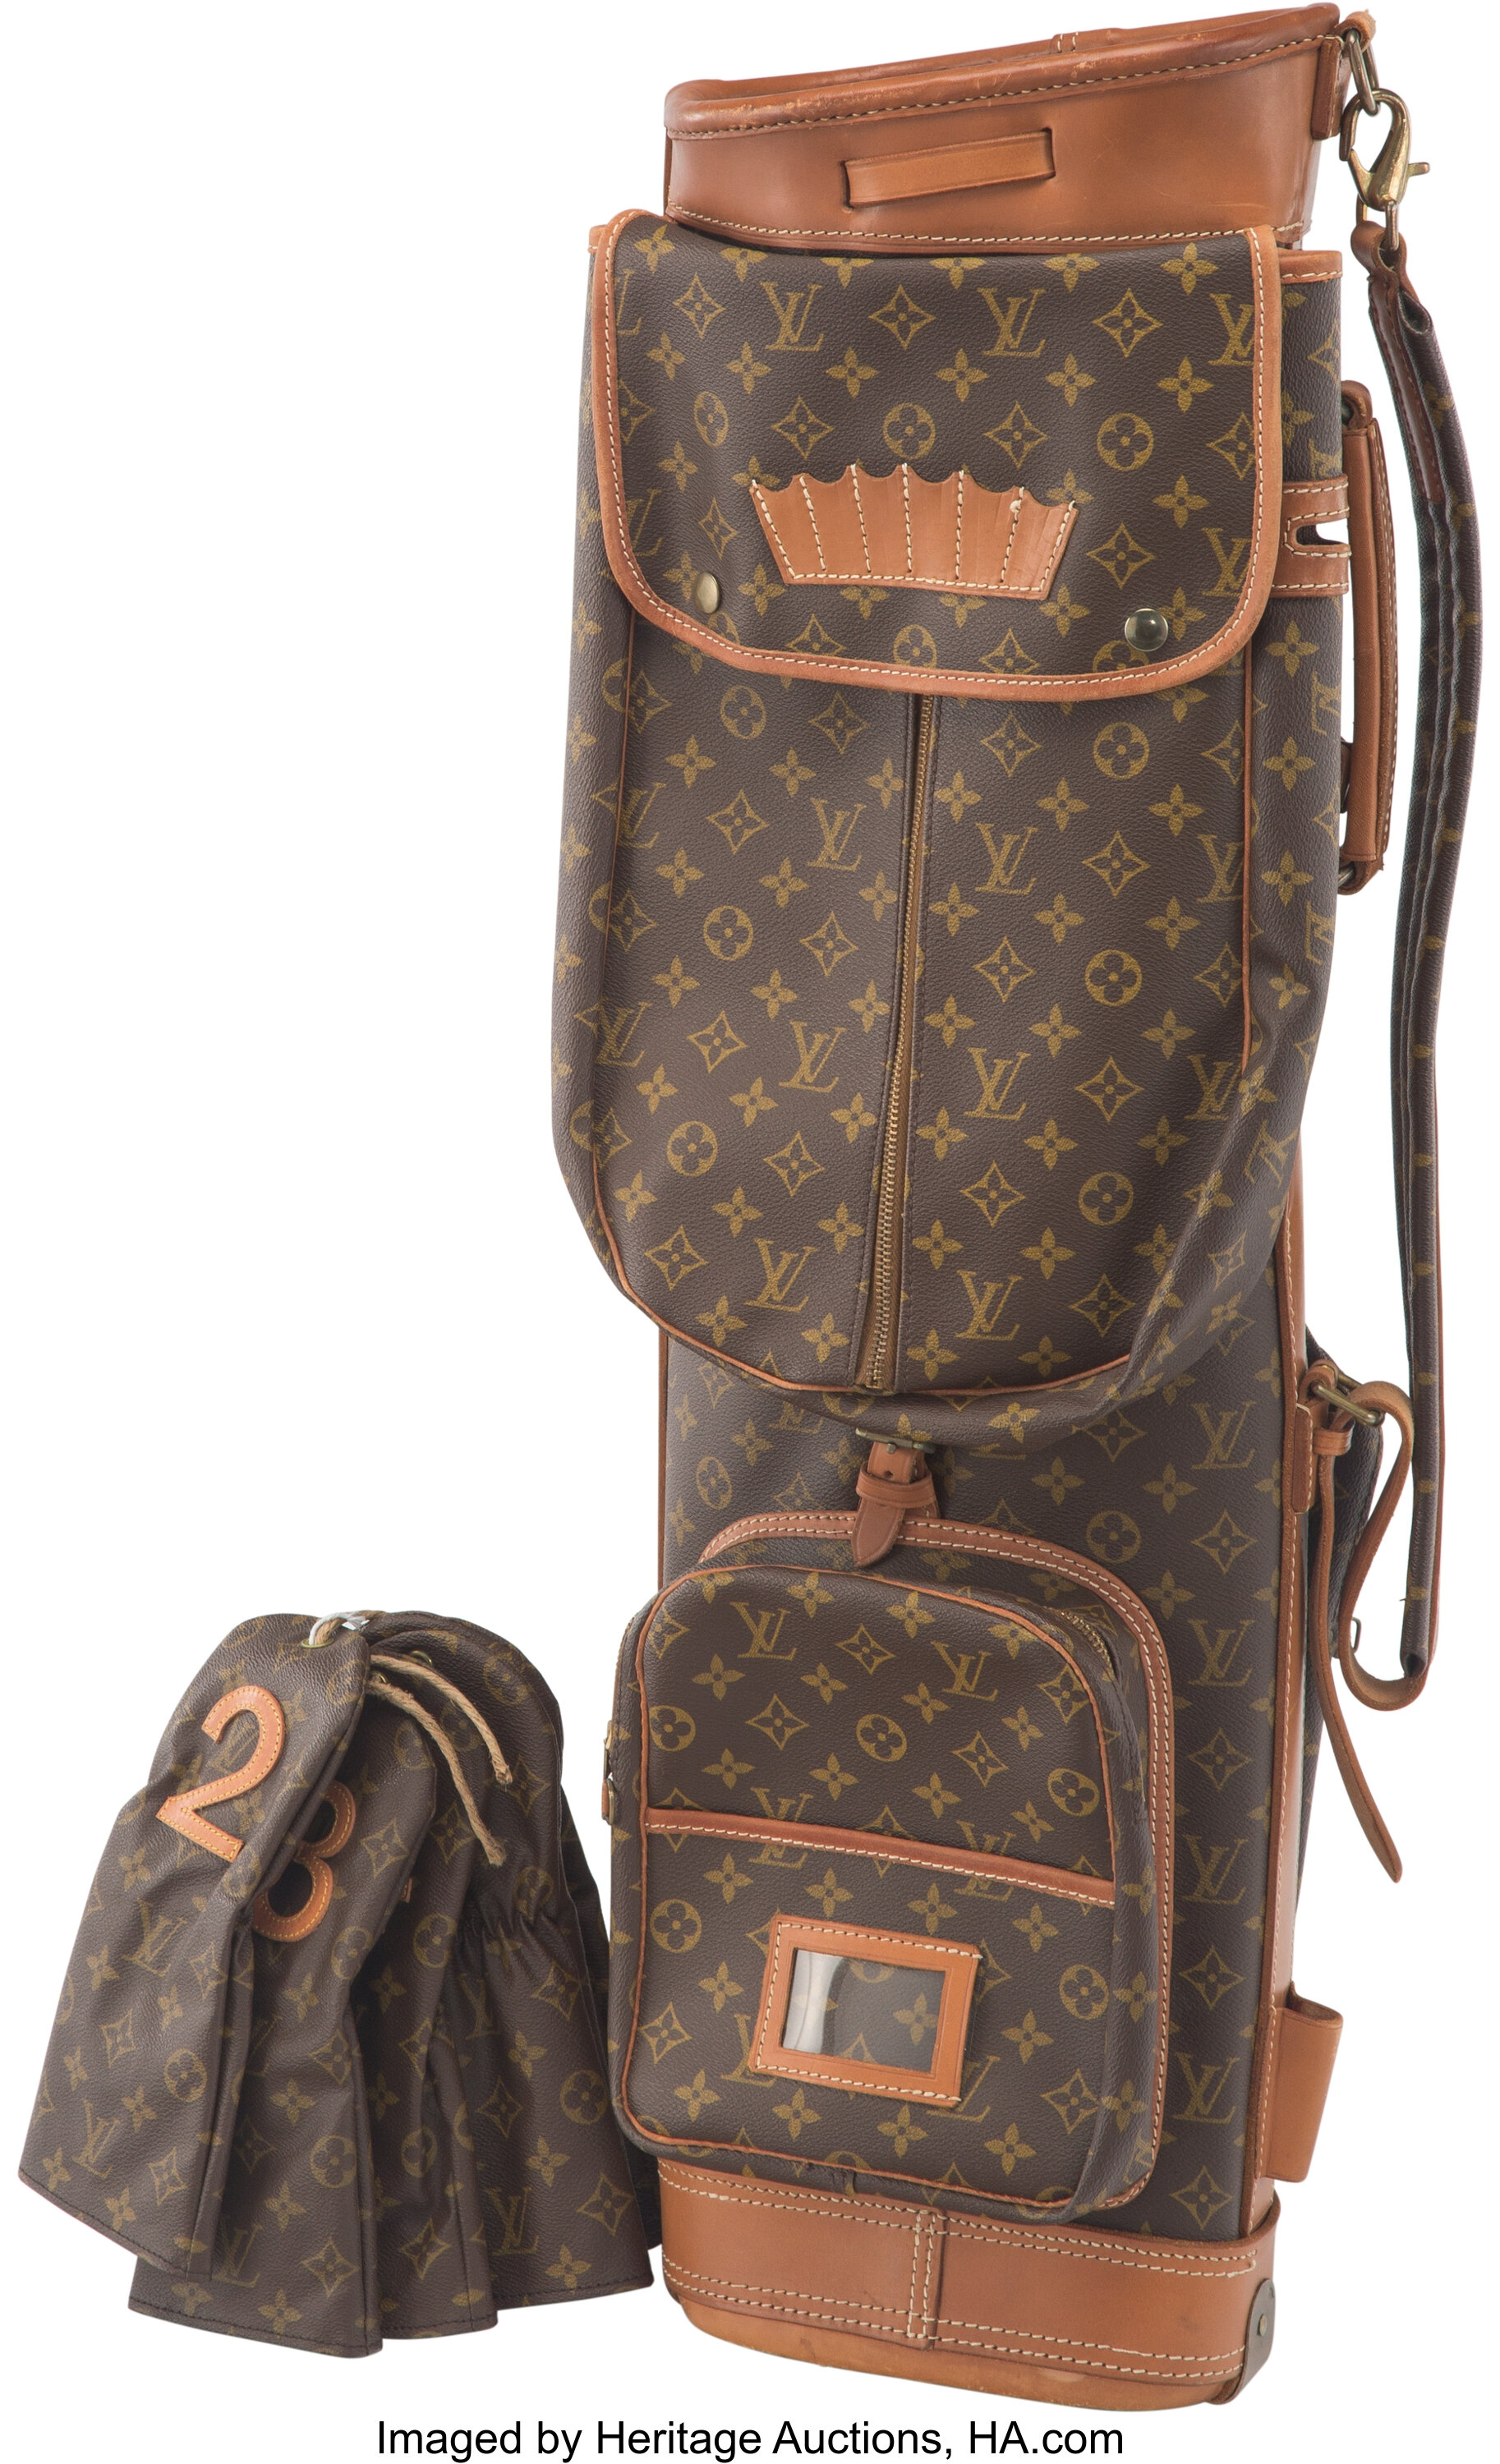 A Louis Vuitton Monogram Canvas and Leather Golf Bag. 33 x 12-1/2